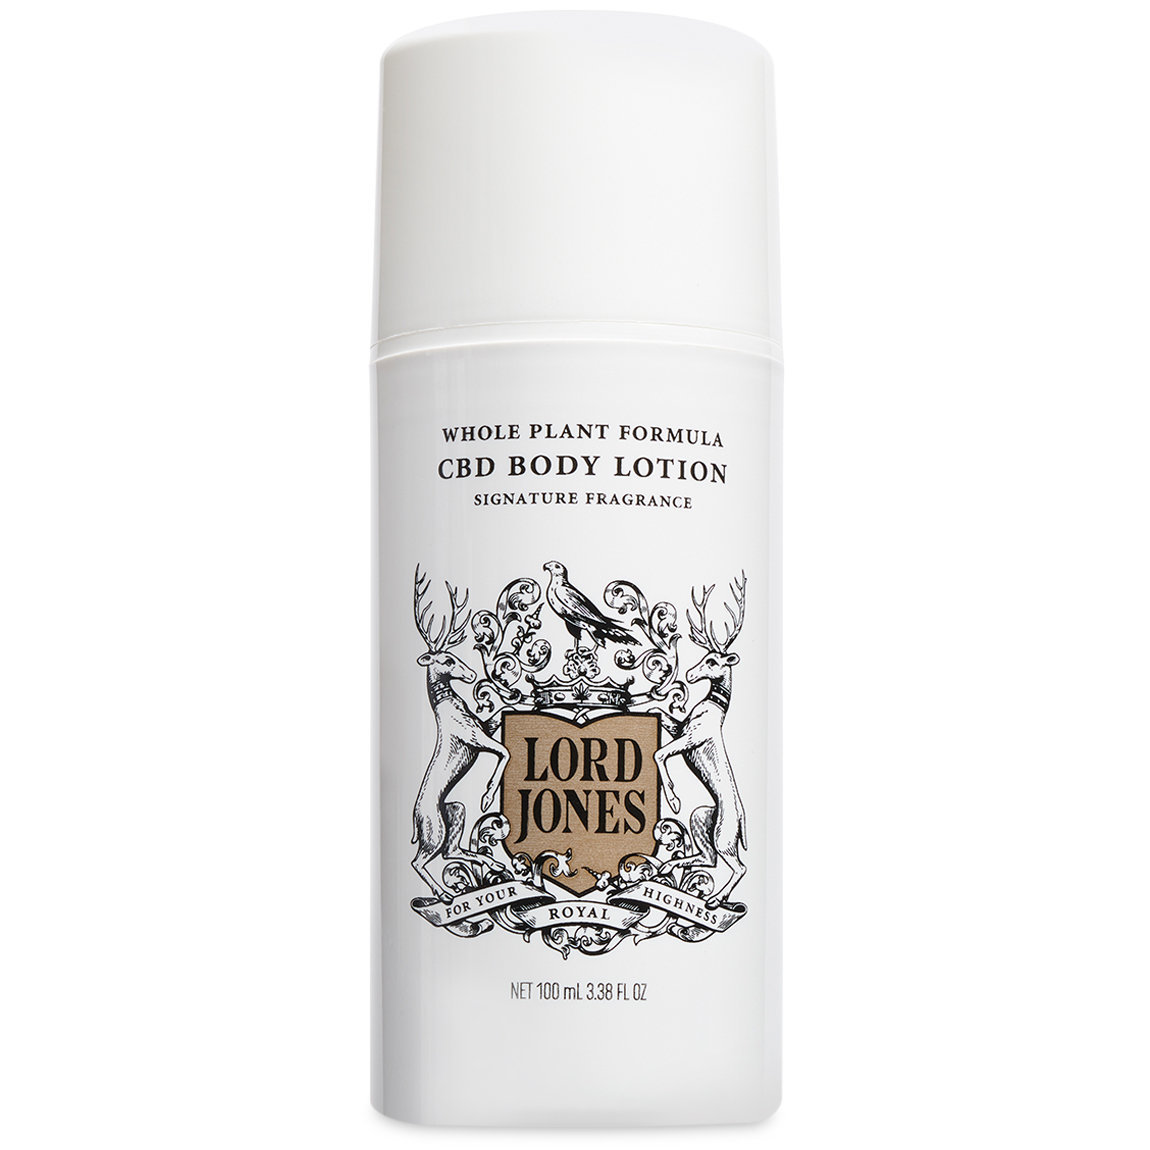 Lord Jones Body Lotion - Signature Fragrance 100 ml alternative view 1 - product swatch.